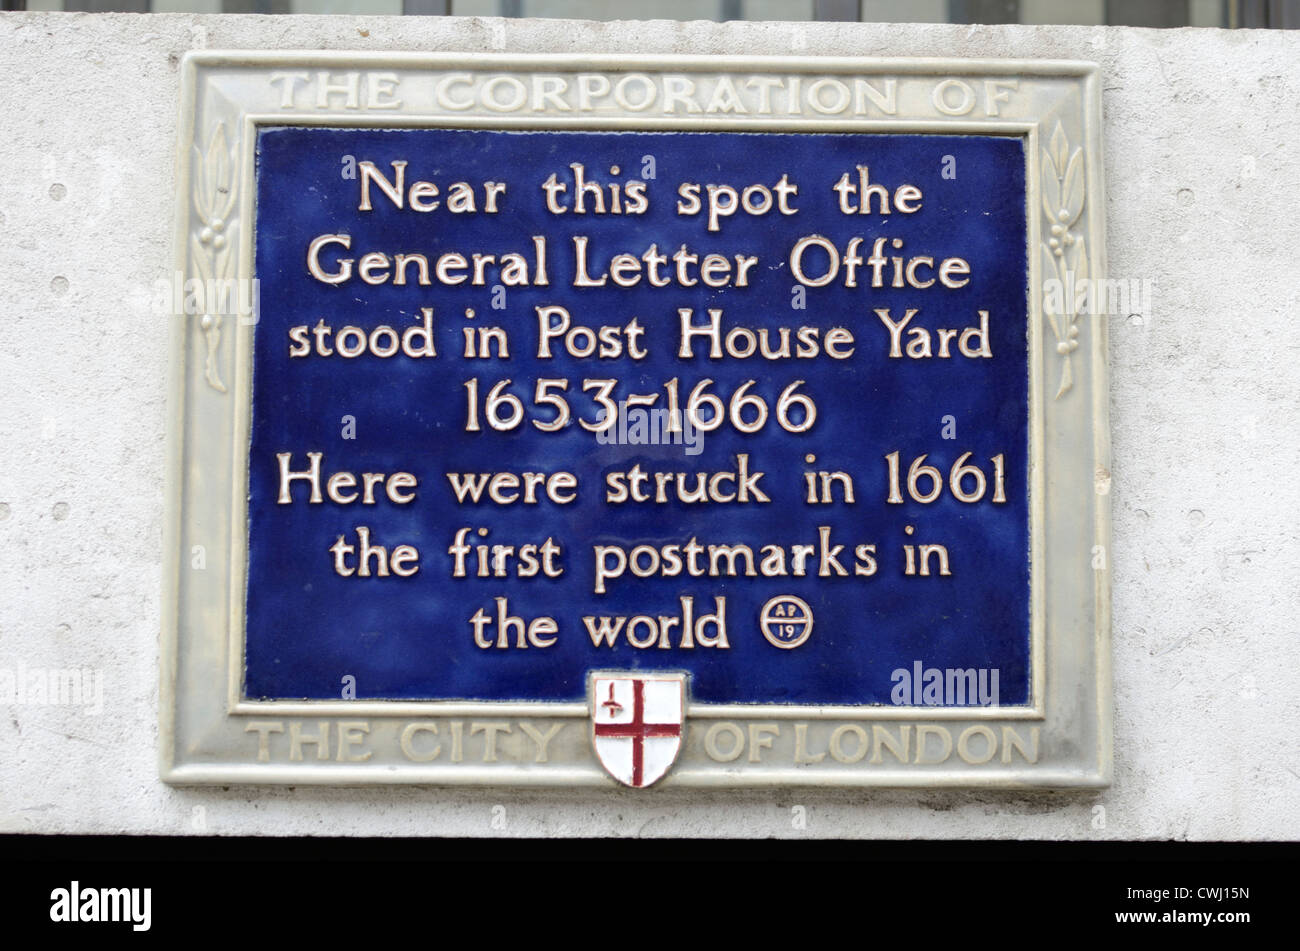 Blue plaque marking the approximate location of the General Letter Office in Post House Yard, Prince's Street, London, UK. Stock Photo